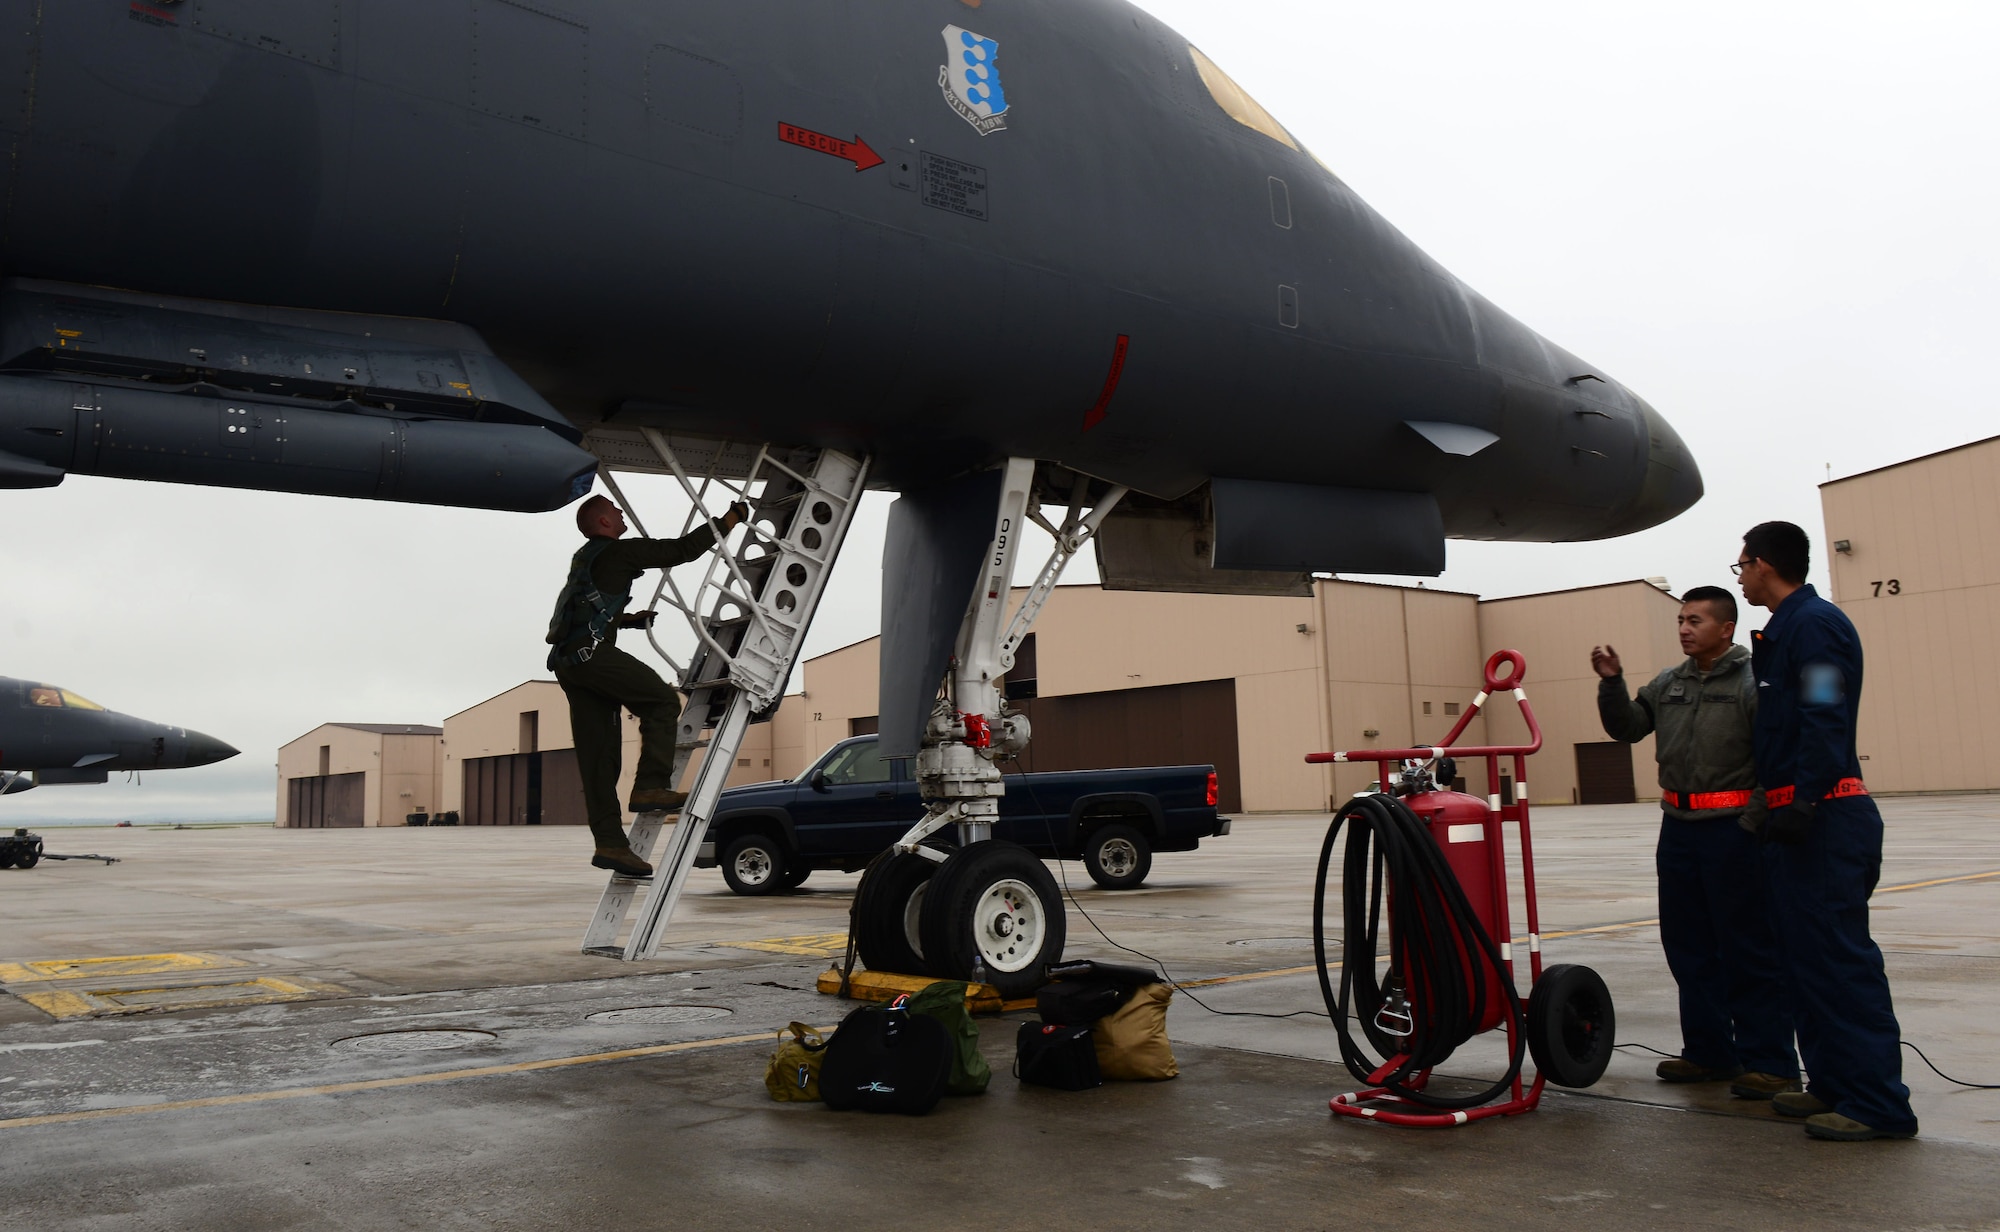 Capt. Dillen Stuhlsatz, a weapon systems officer assigned to the 34th Bomb Squadron, enters a B-1 bomber during the Combat Hammer exercise at Ellsworth Air Force Base, S.D., May 10, 2017. With a strong, credible B-1 force, Ellsworth aircrews and maintainers maintain a high state of readiness and proficiency, validating what Airmen bring to the fight – immediate global reach. (U.S. Air Force photo by Airman 1st Class Donald C. Knechtel)